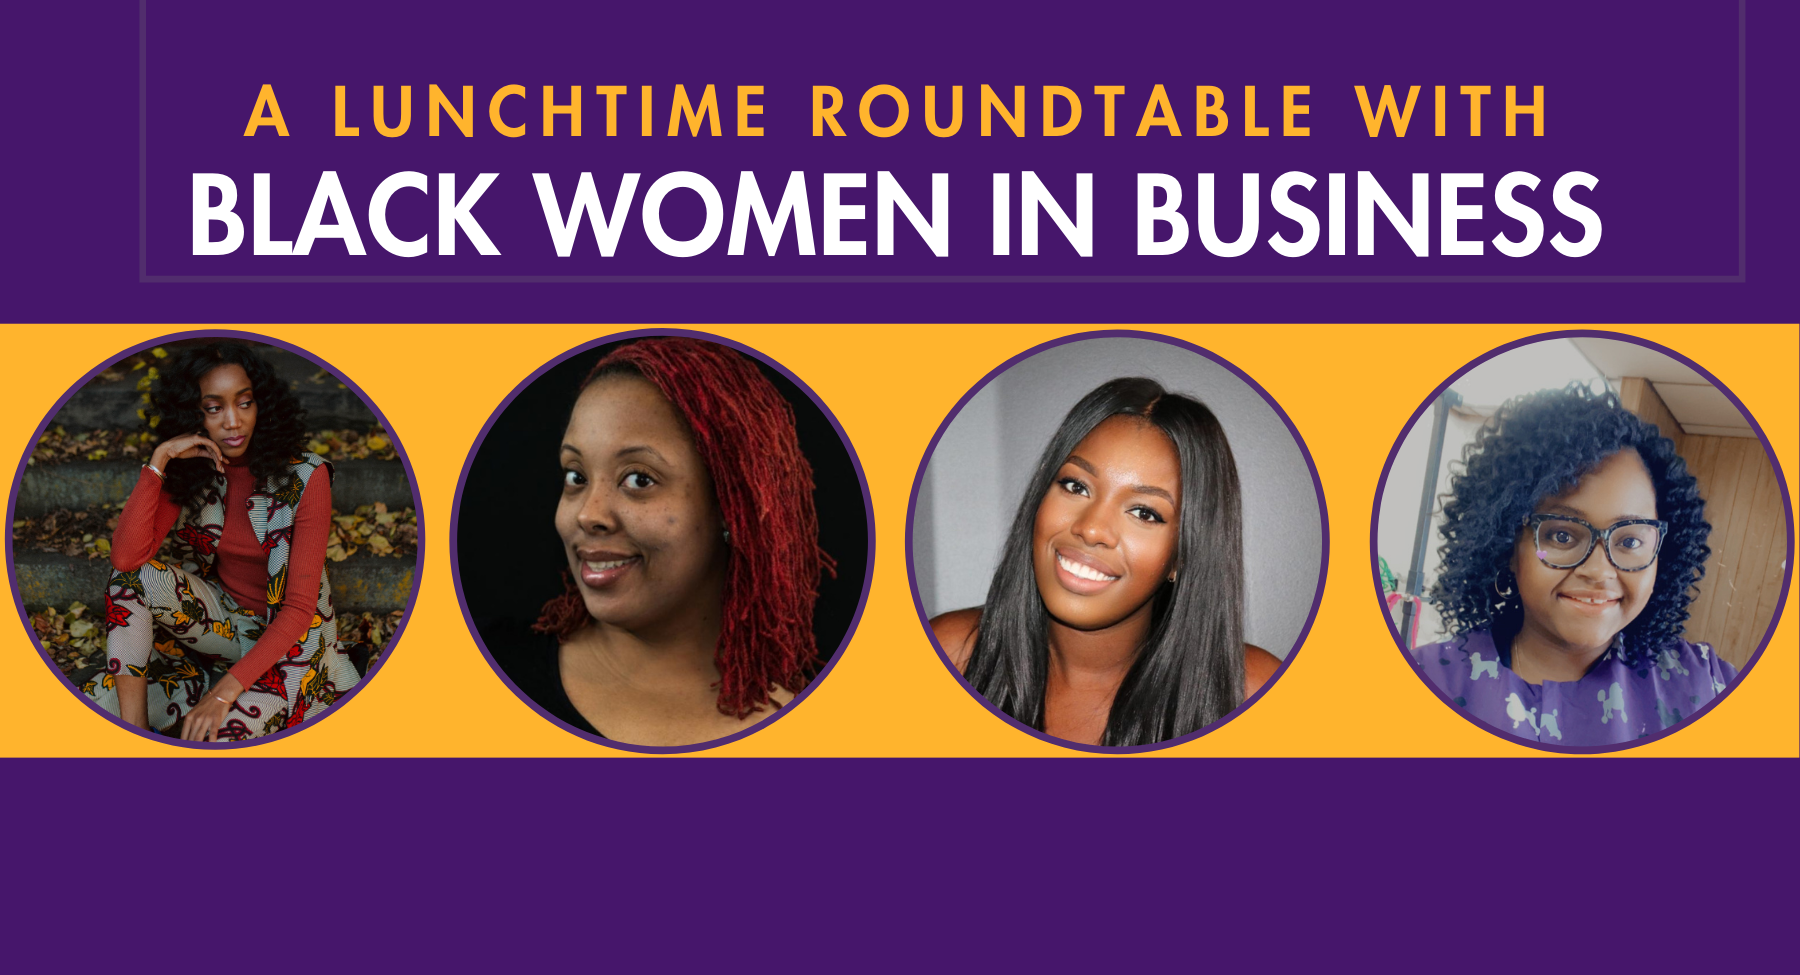 University to Host Lunchtime Roundtable with Black Women in Business |  Royal News: January 4 2023